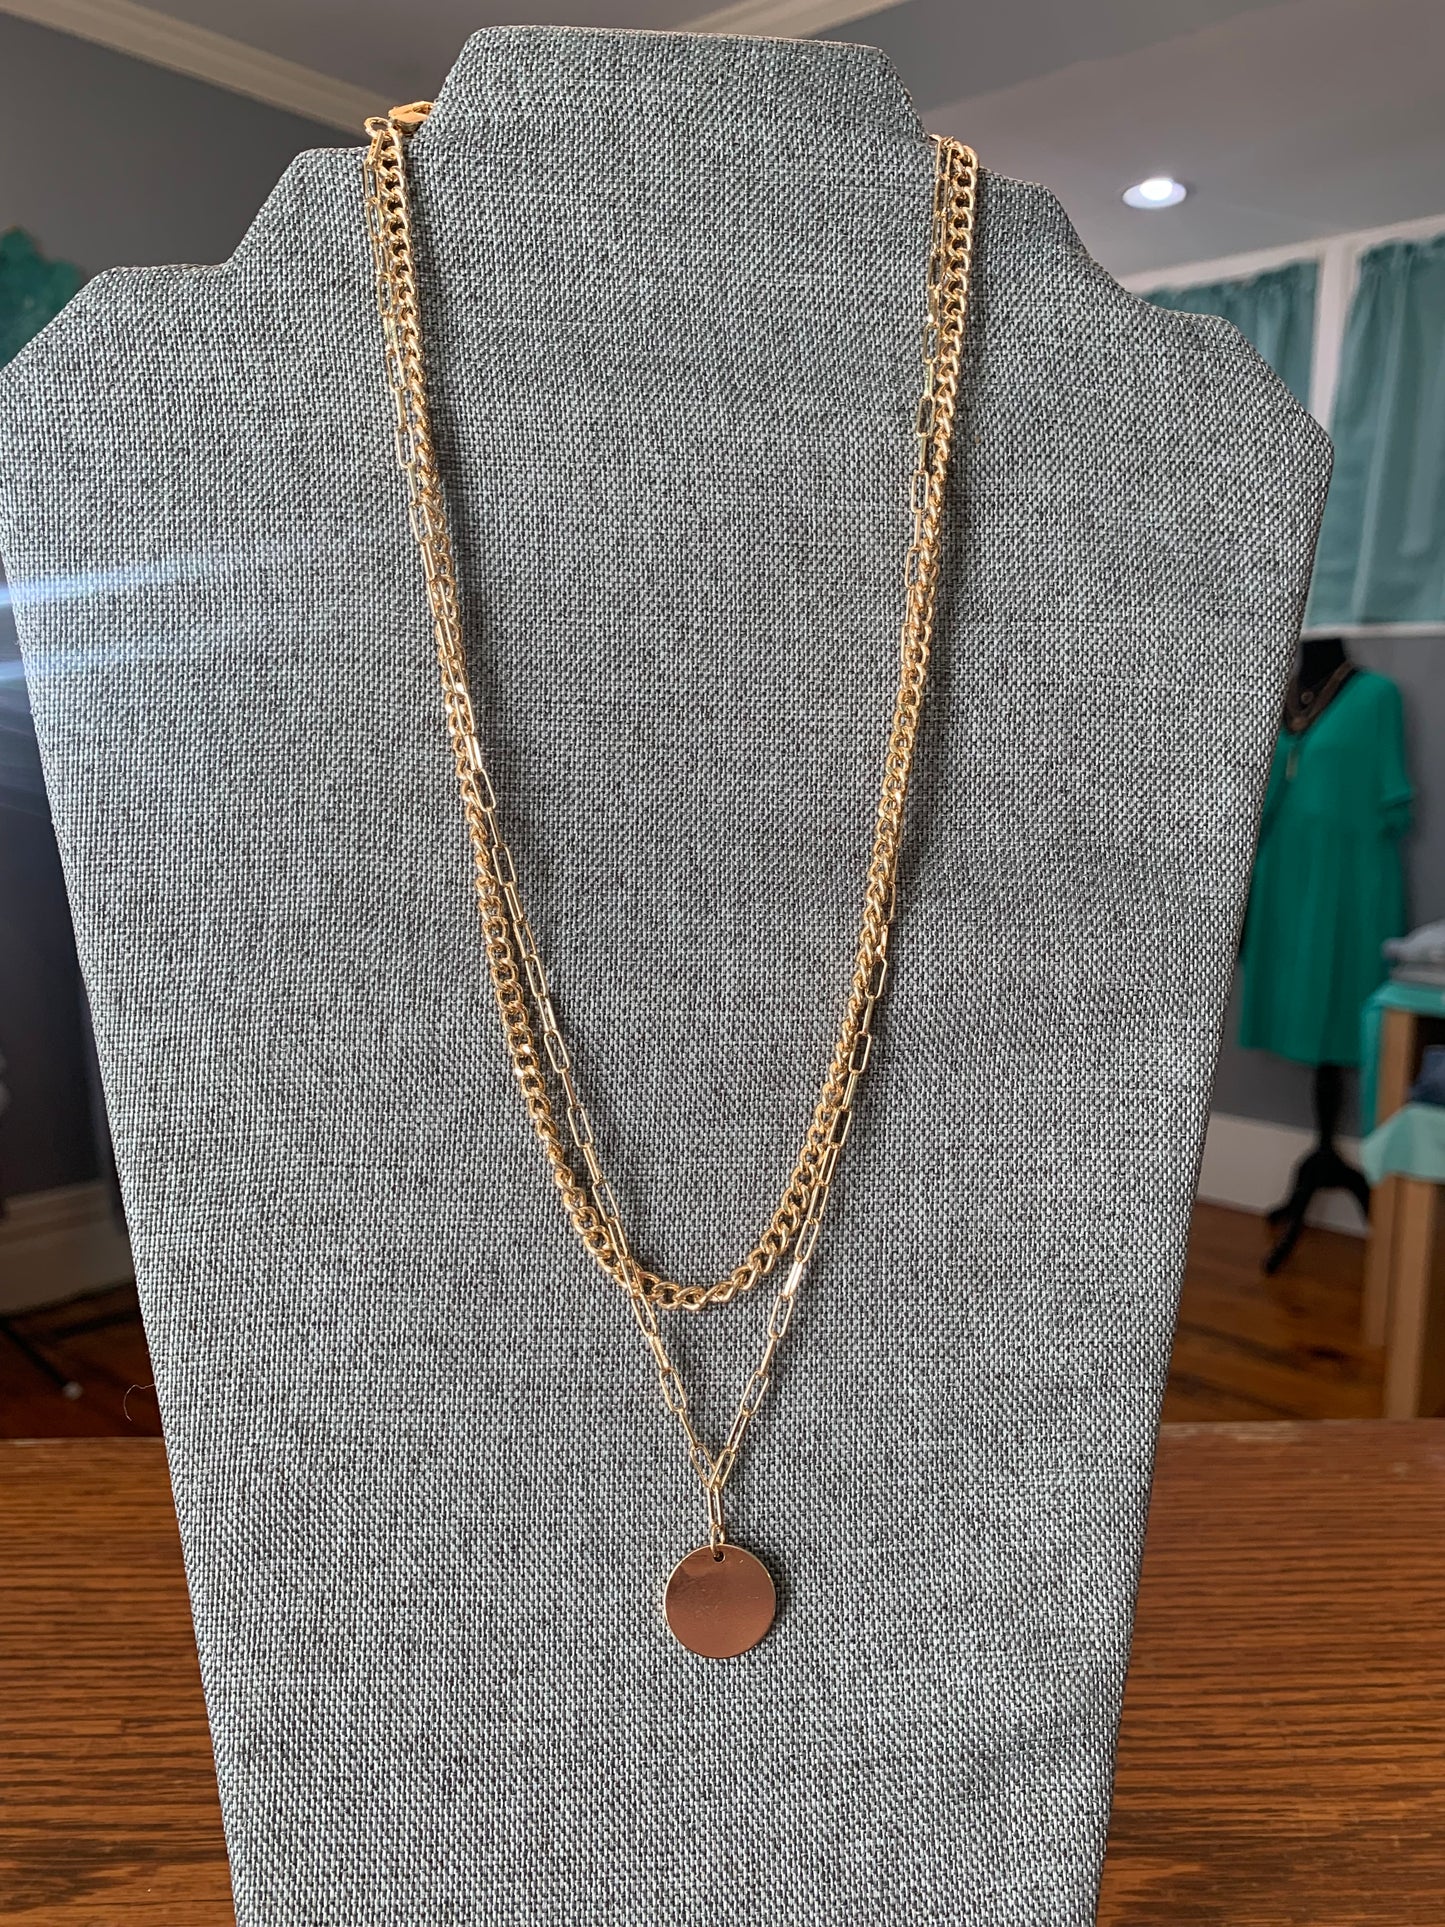 2 Strand Gold Necklace